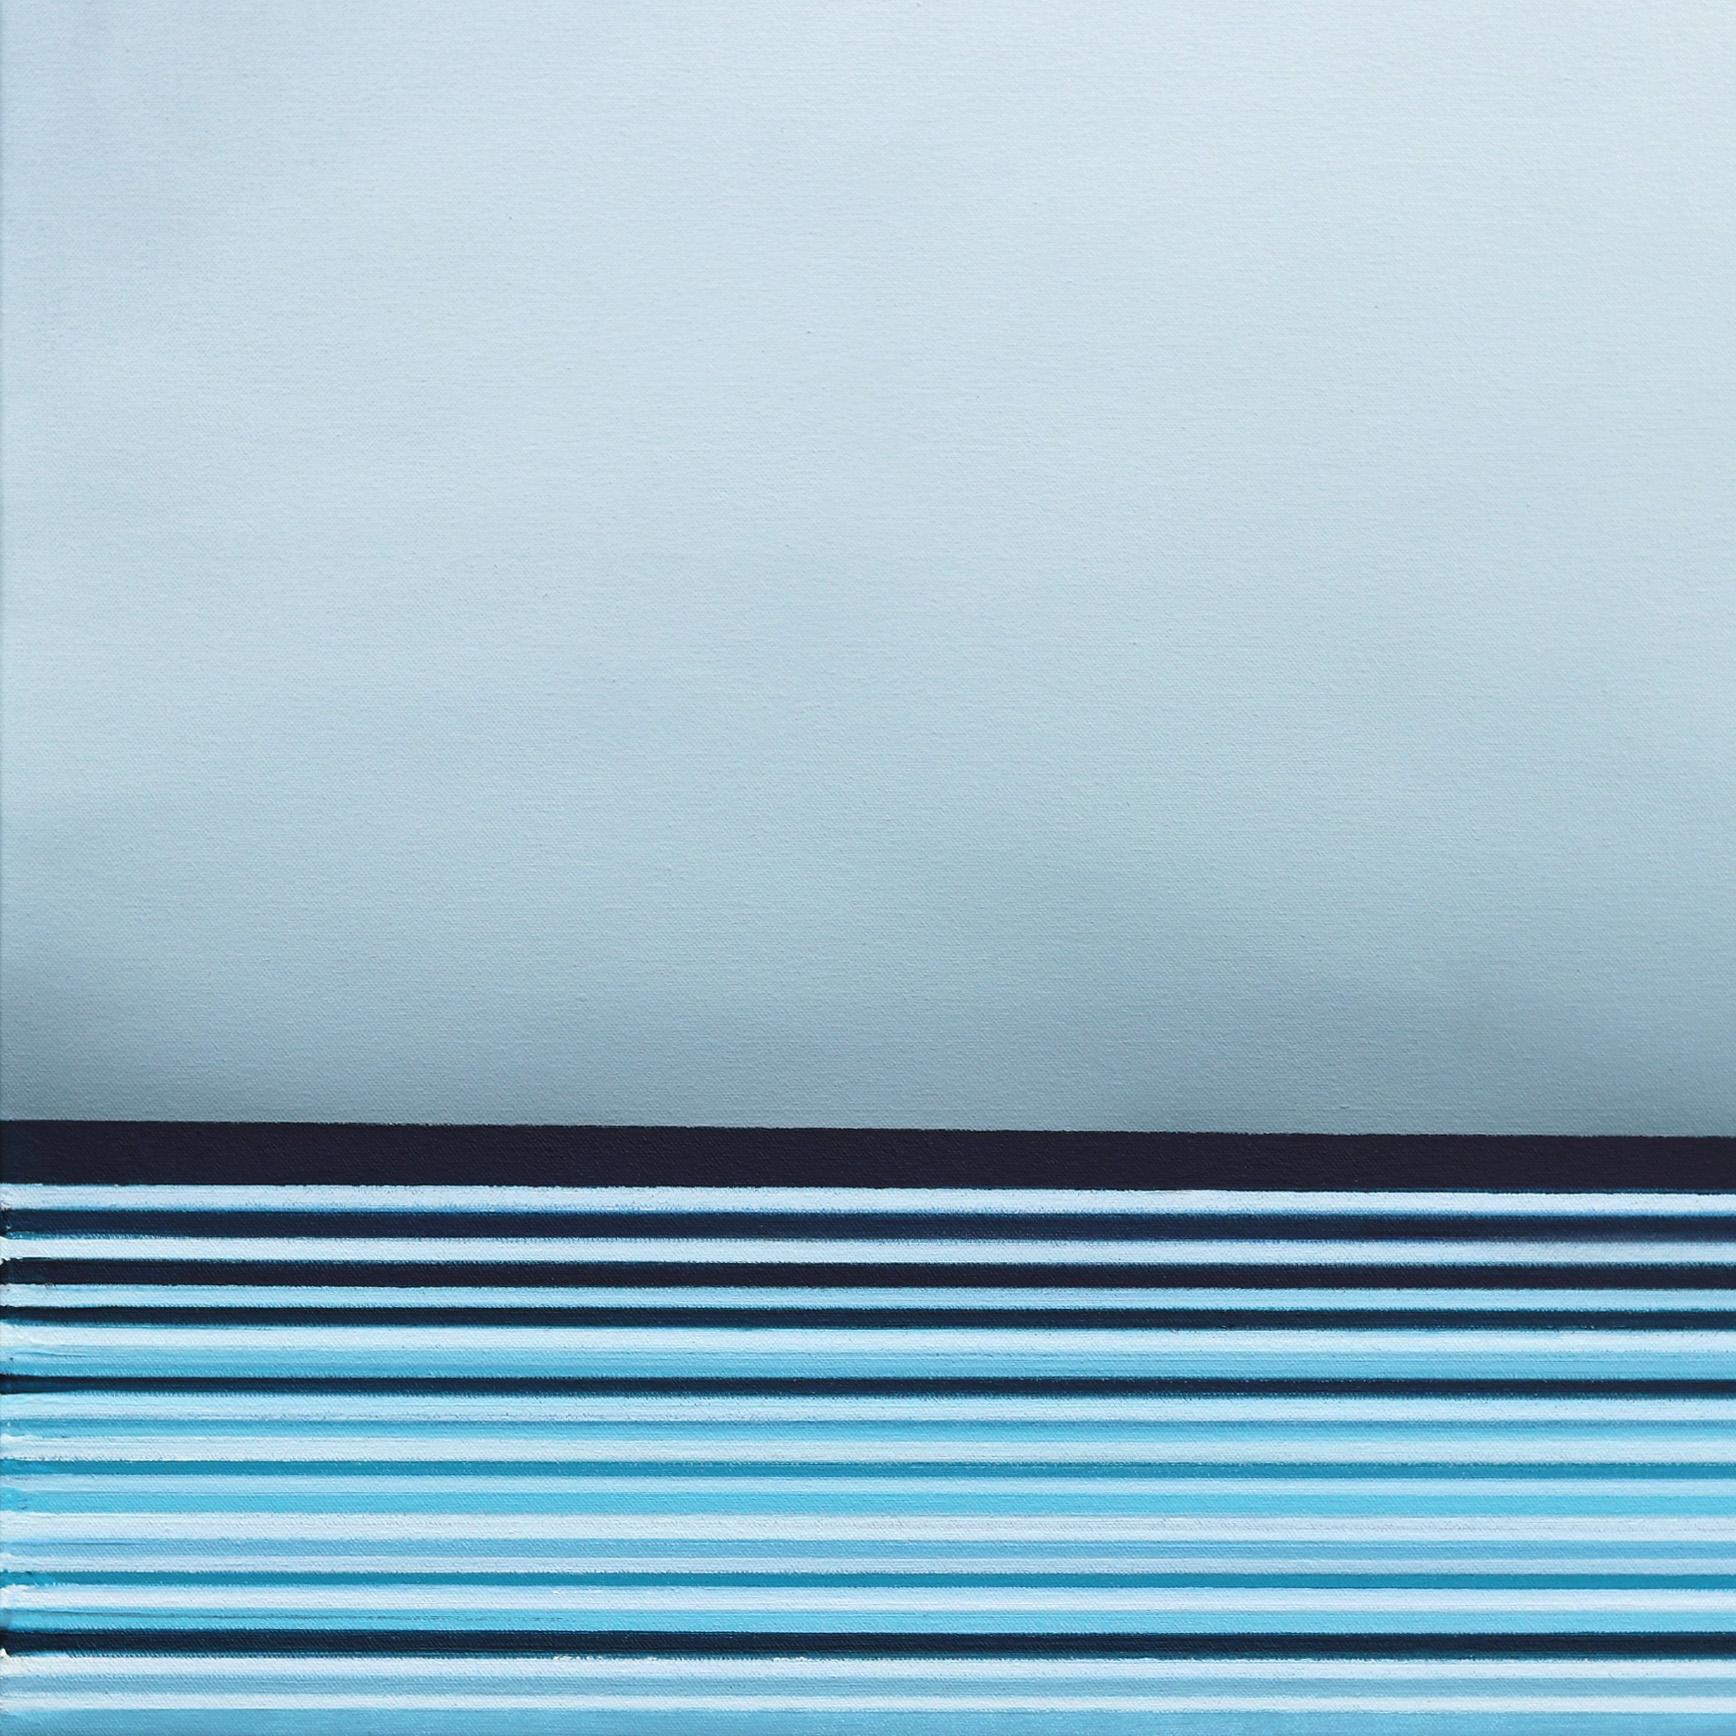 Untitled No. 463 - Framed Contemporary Minimalist Blue Artwork For Sale 4